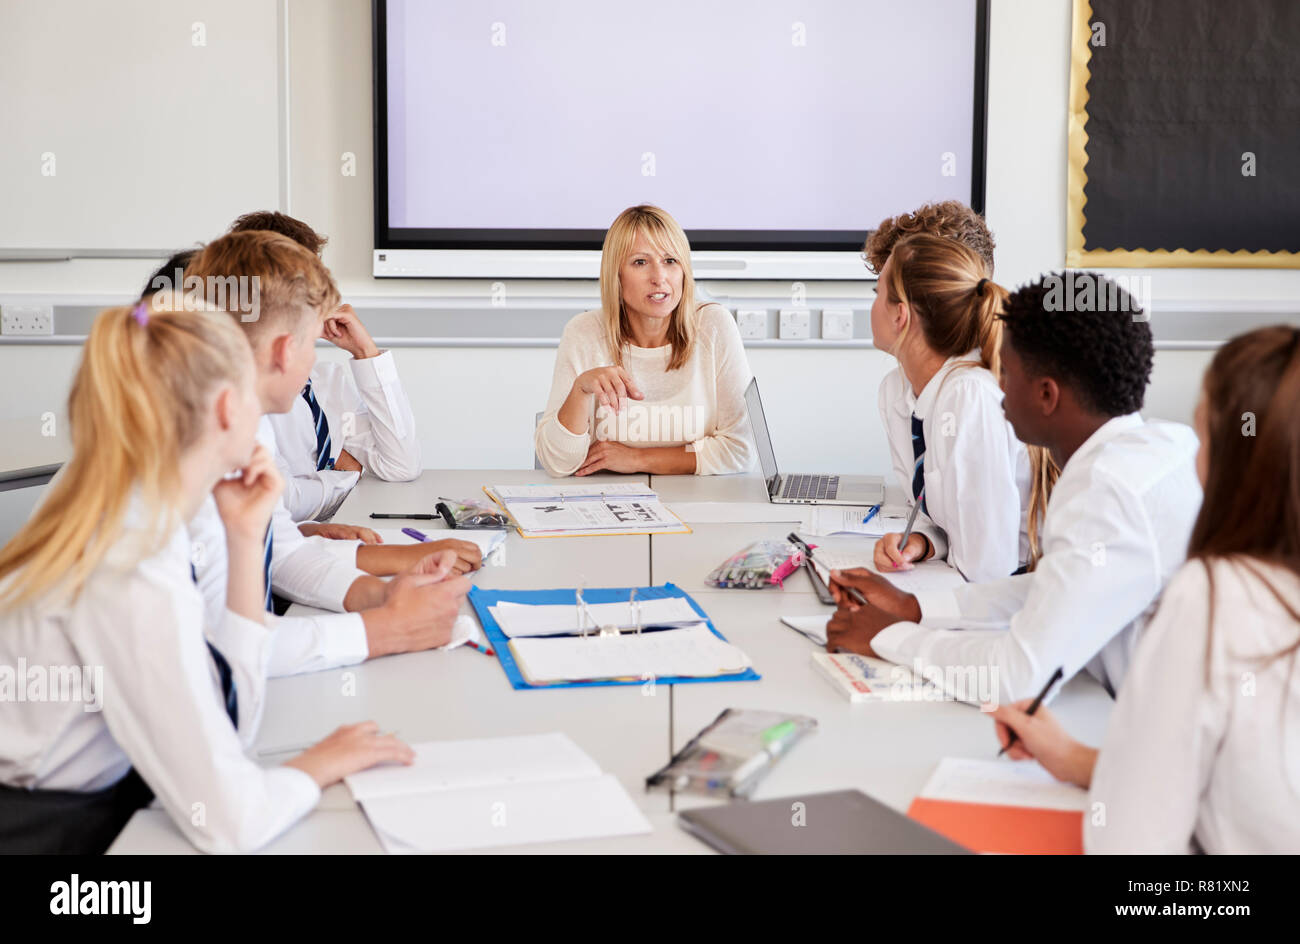 Female High School Teacher Sitting At Table With Teenage Pupils Wearing Uniform Teaching Lesson Stock Photo